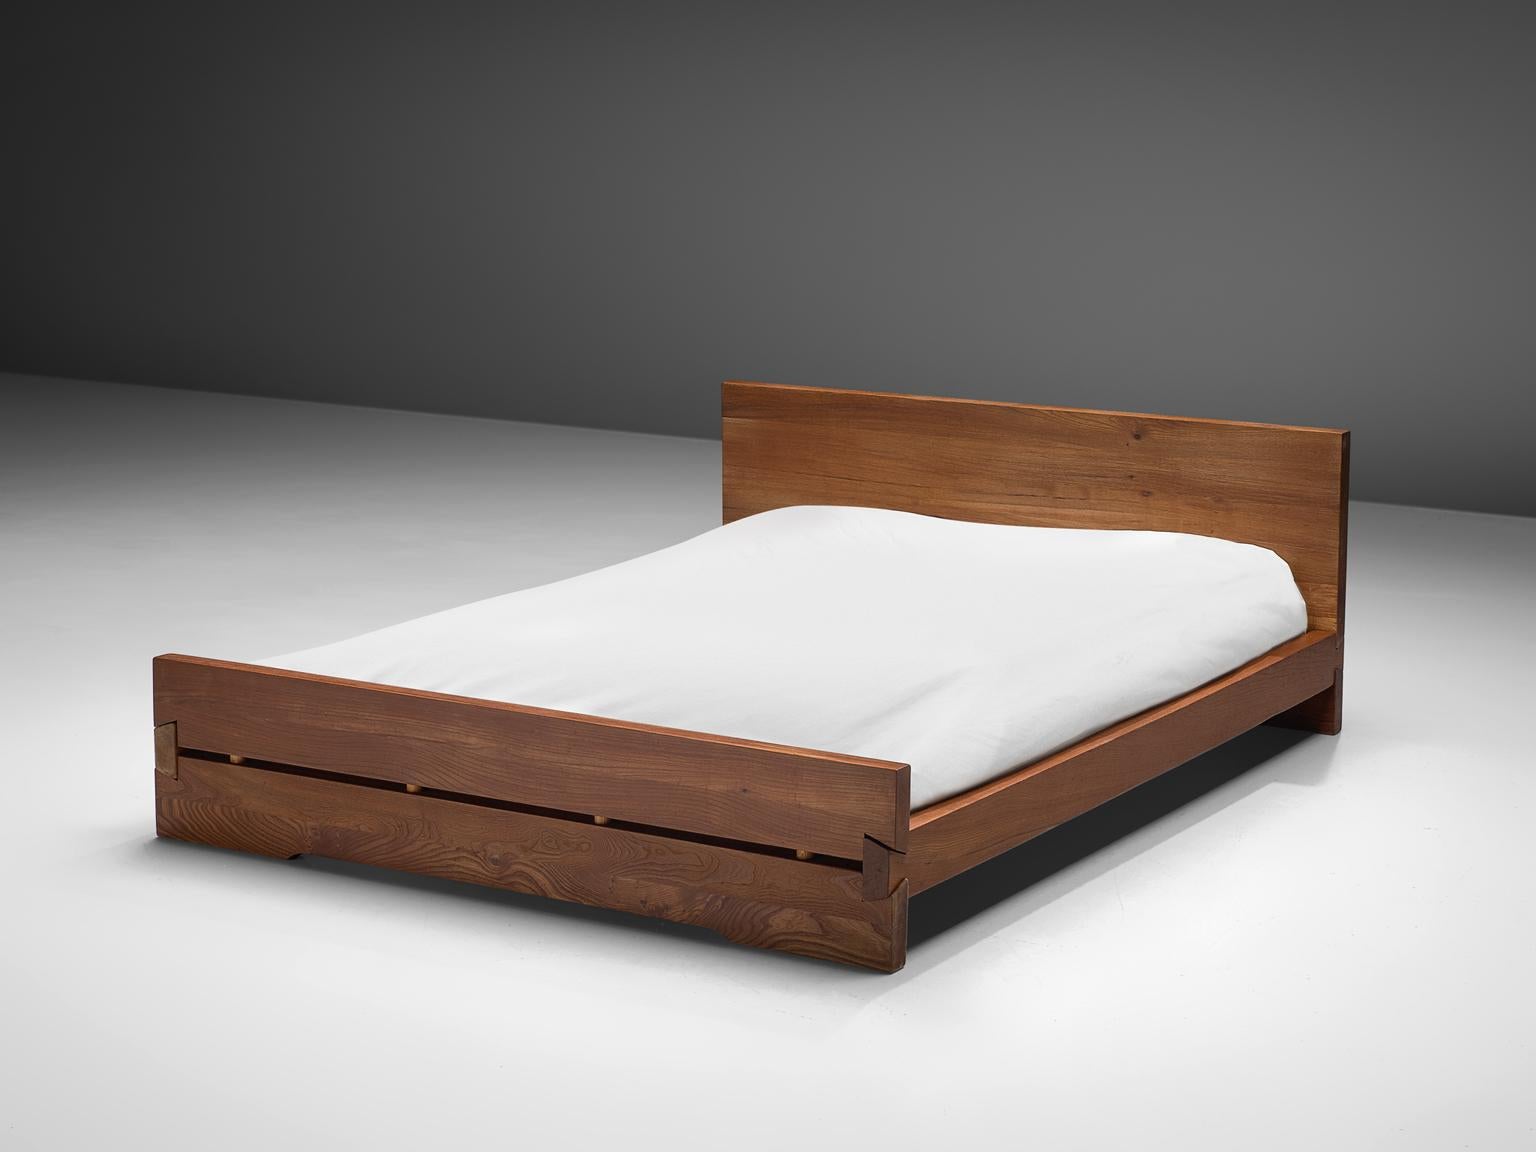 Pierre Chapo, 'Louis' bed L02D, elm, France, 1960s

This bed is designed by Pierre Chapo in the 1960s. The bed features the hand-crafted joints that the woodworker Chapo is known for. The bed holds a tall headboard and a lower foot end. The elm has